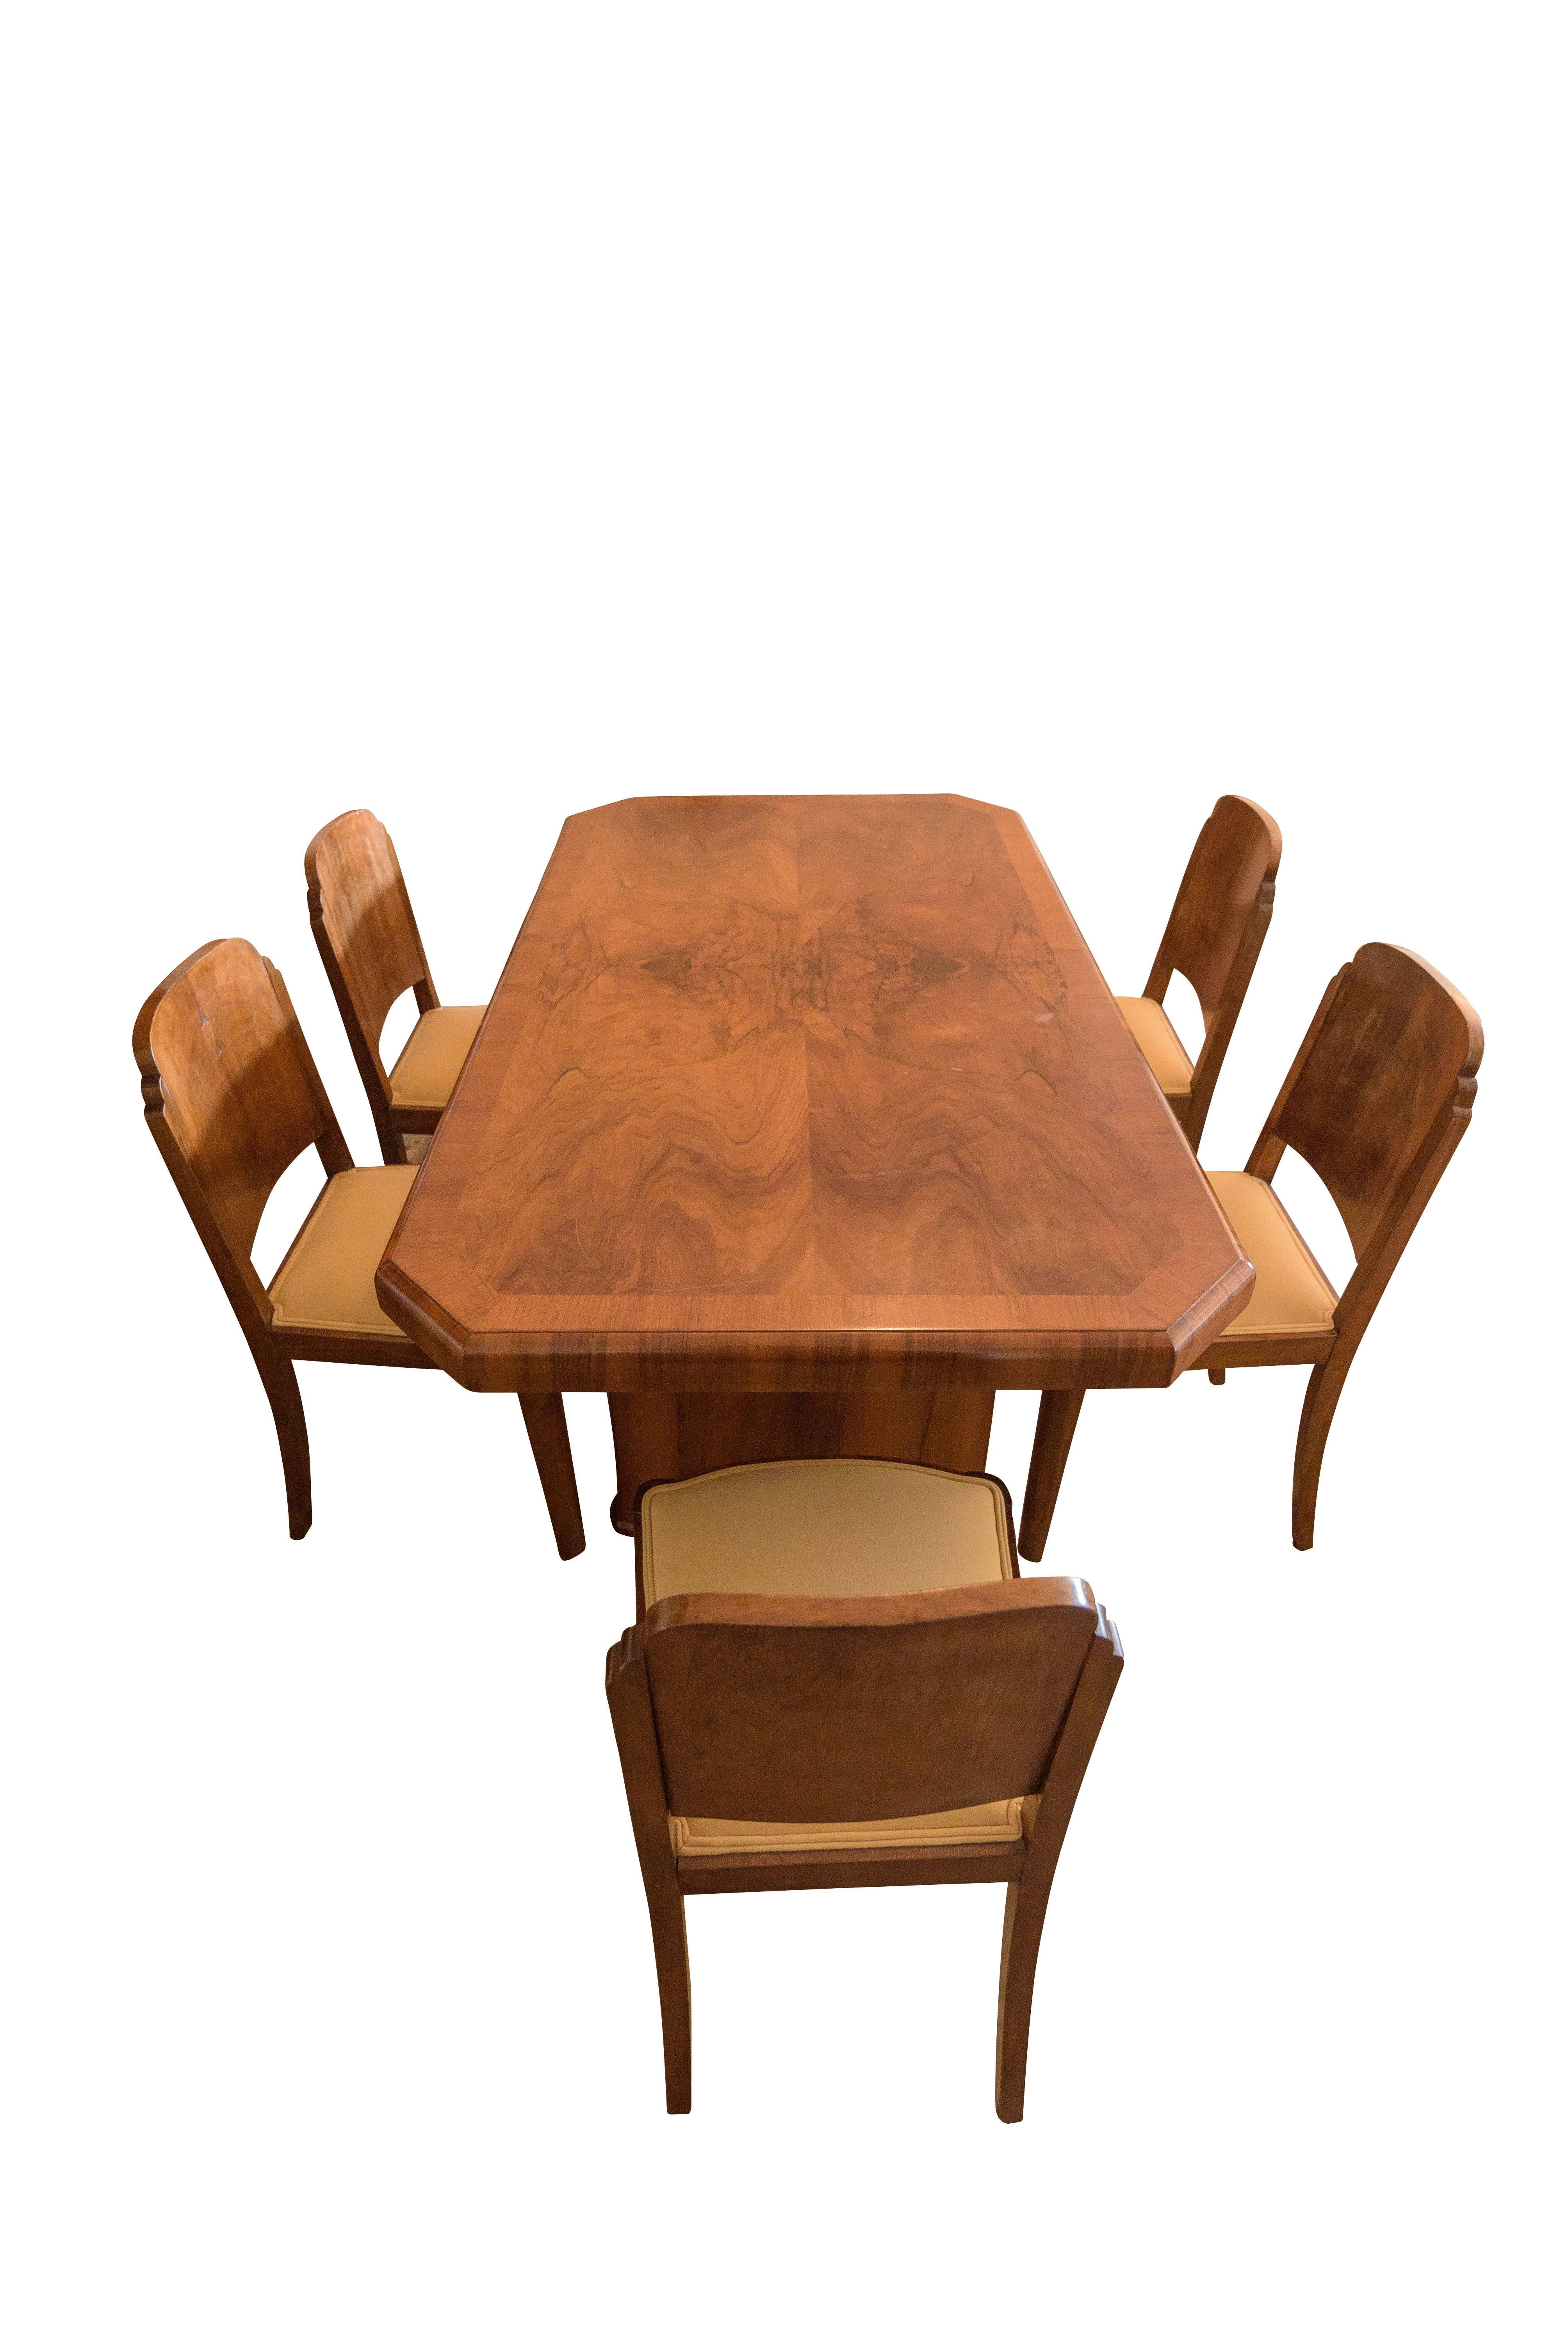 Great living room set consisting of a large walnut dining table with 6 matching chairs with fabric. Convinces with its typical Art Deco design including straight lines and a very special wooden grain.

    - original set from Spain, 1920s
    -